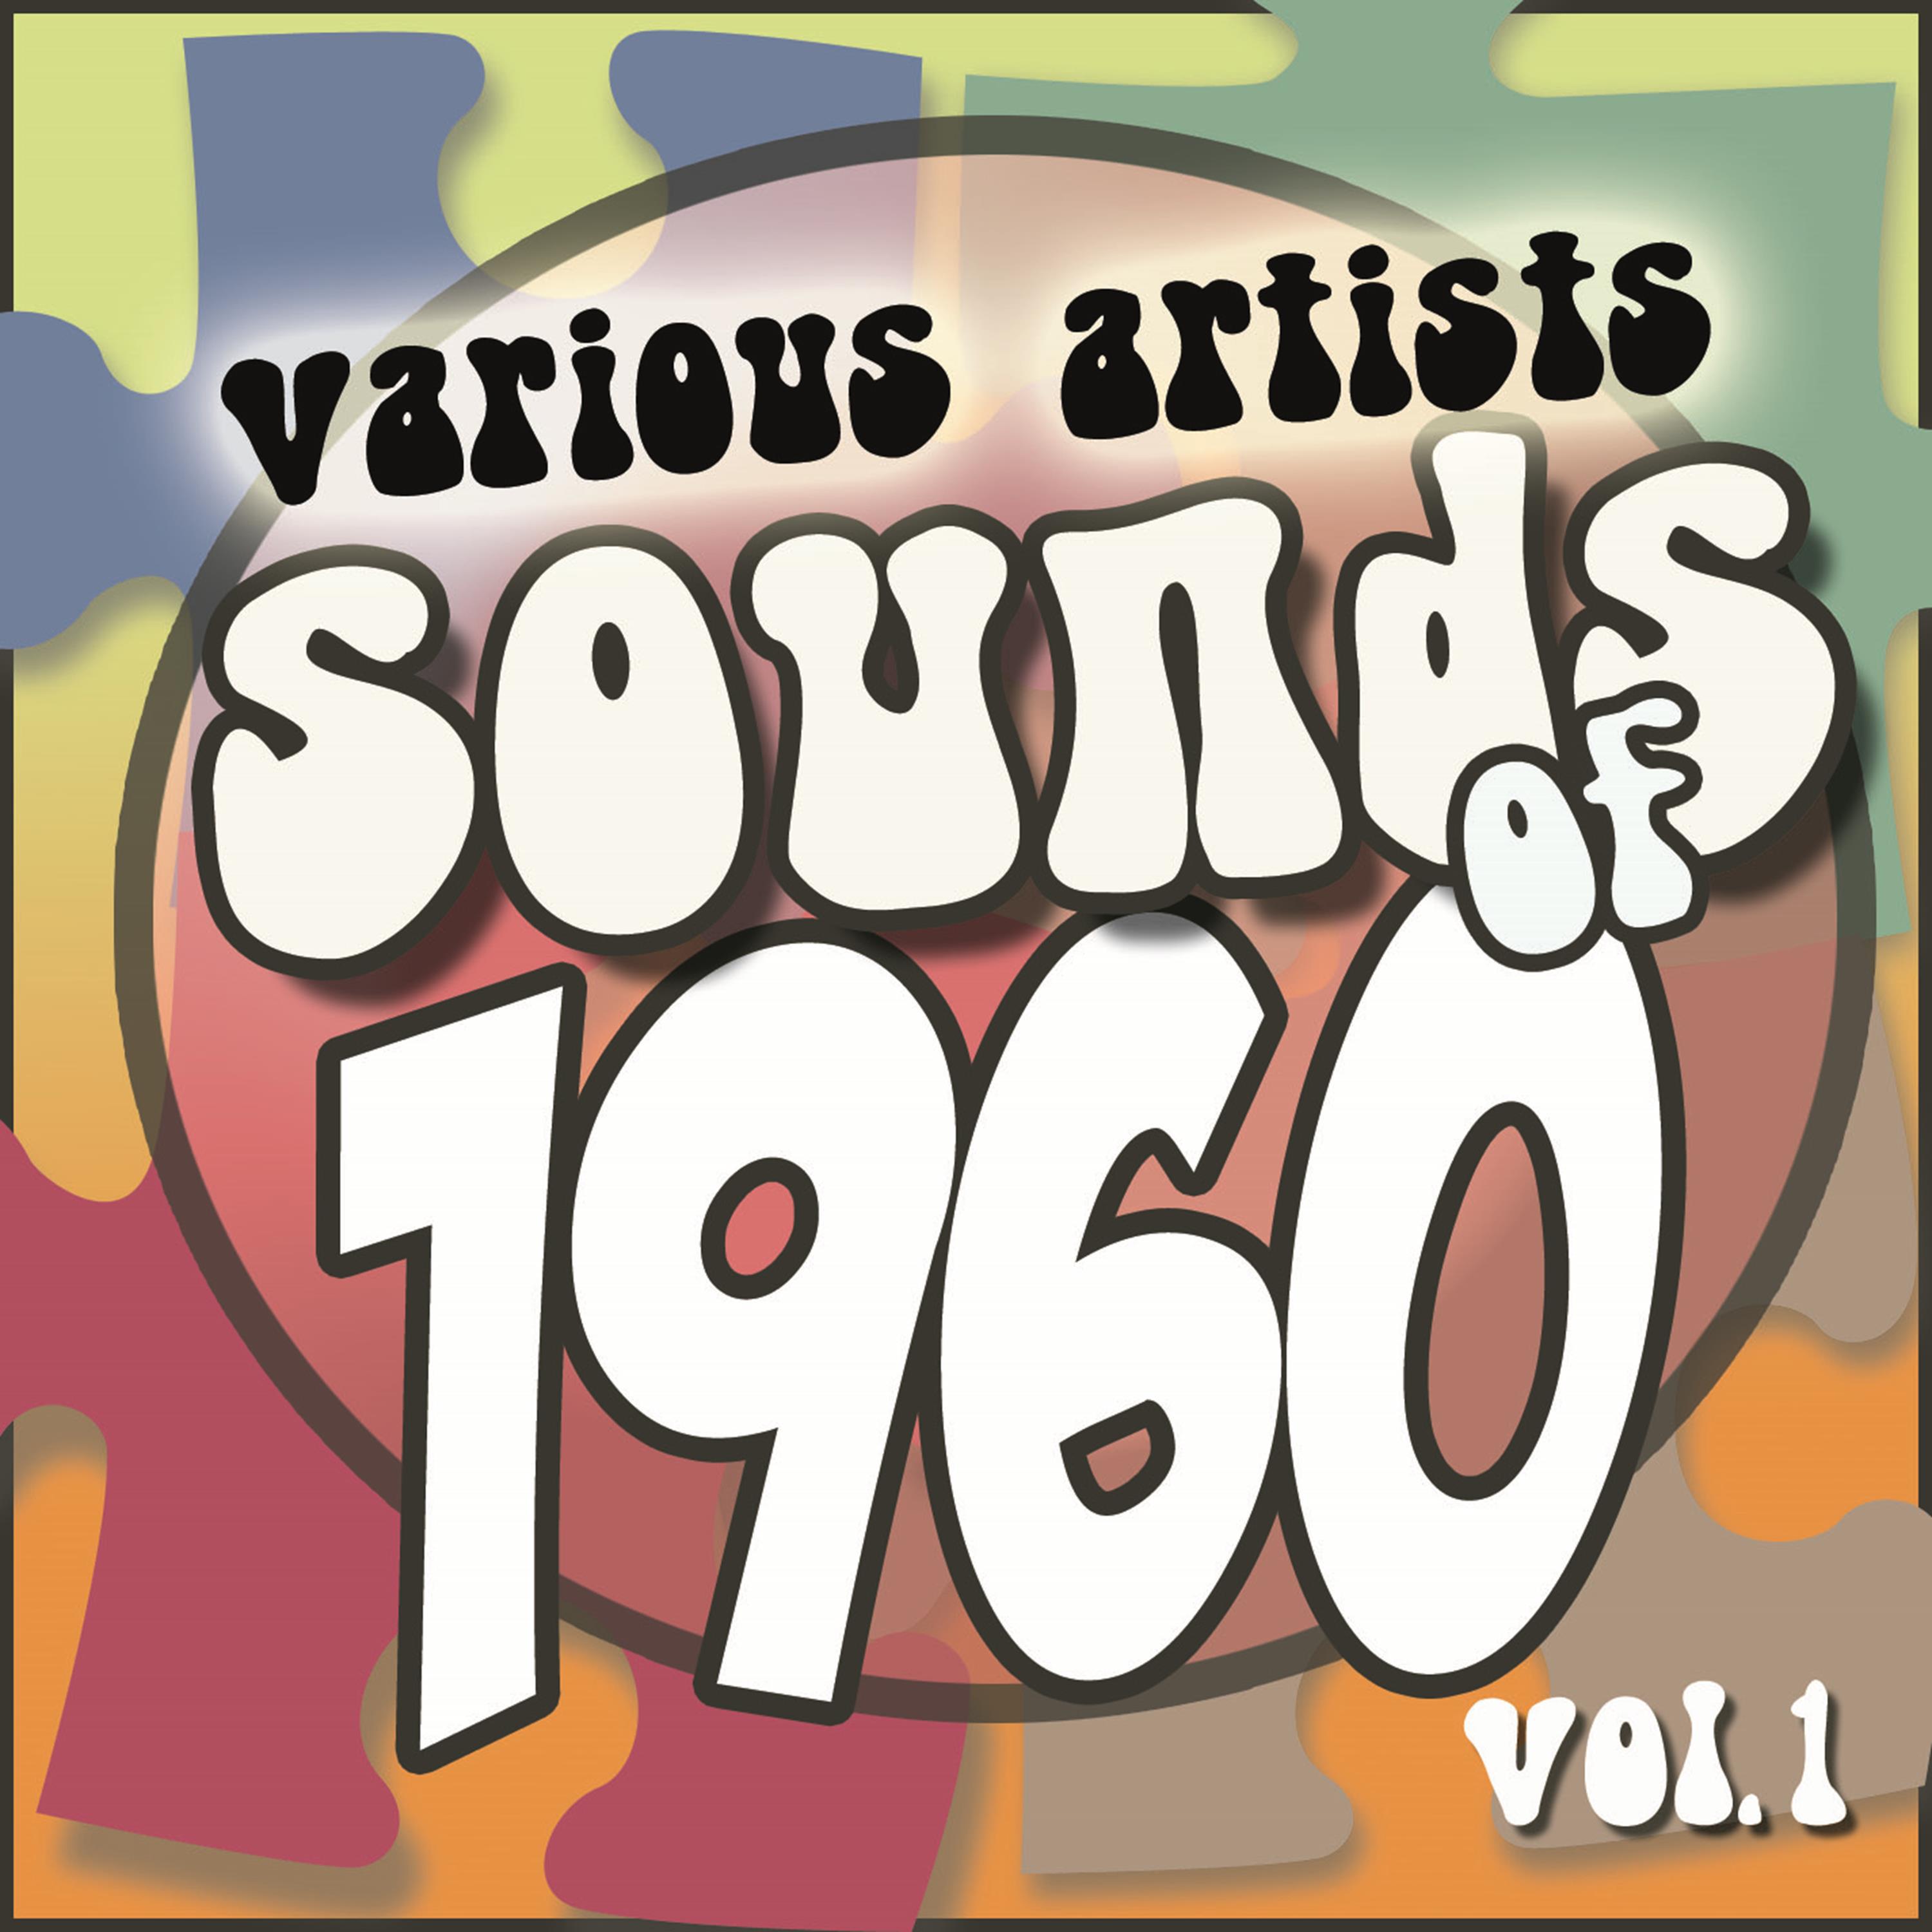 Sounds of 1960, Vol. 3 (Remastered)